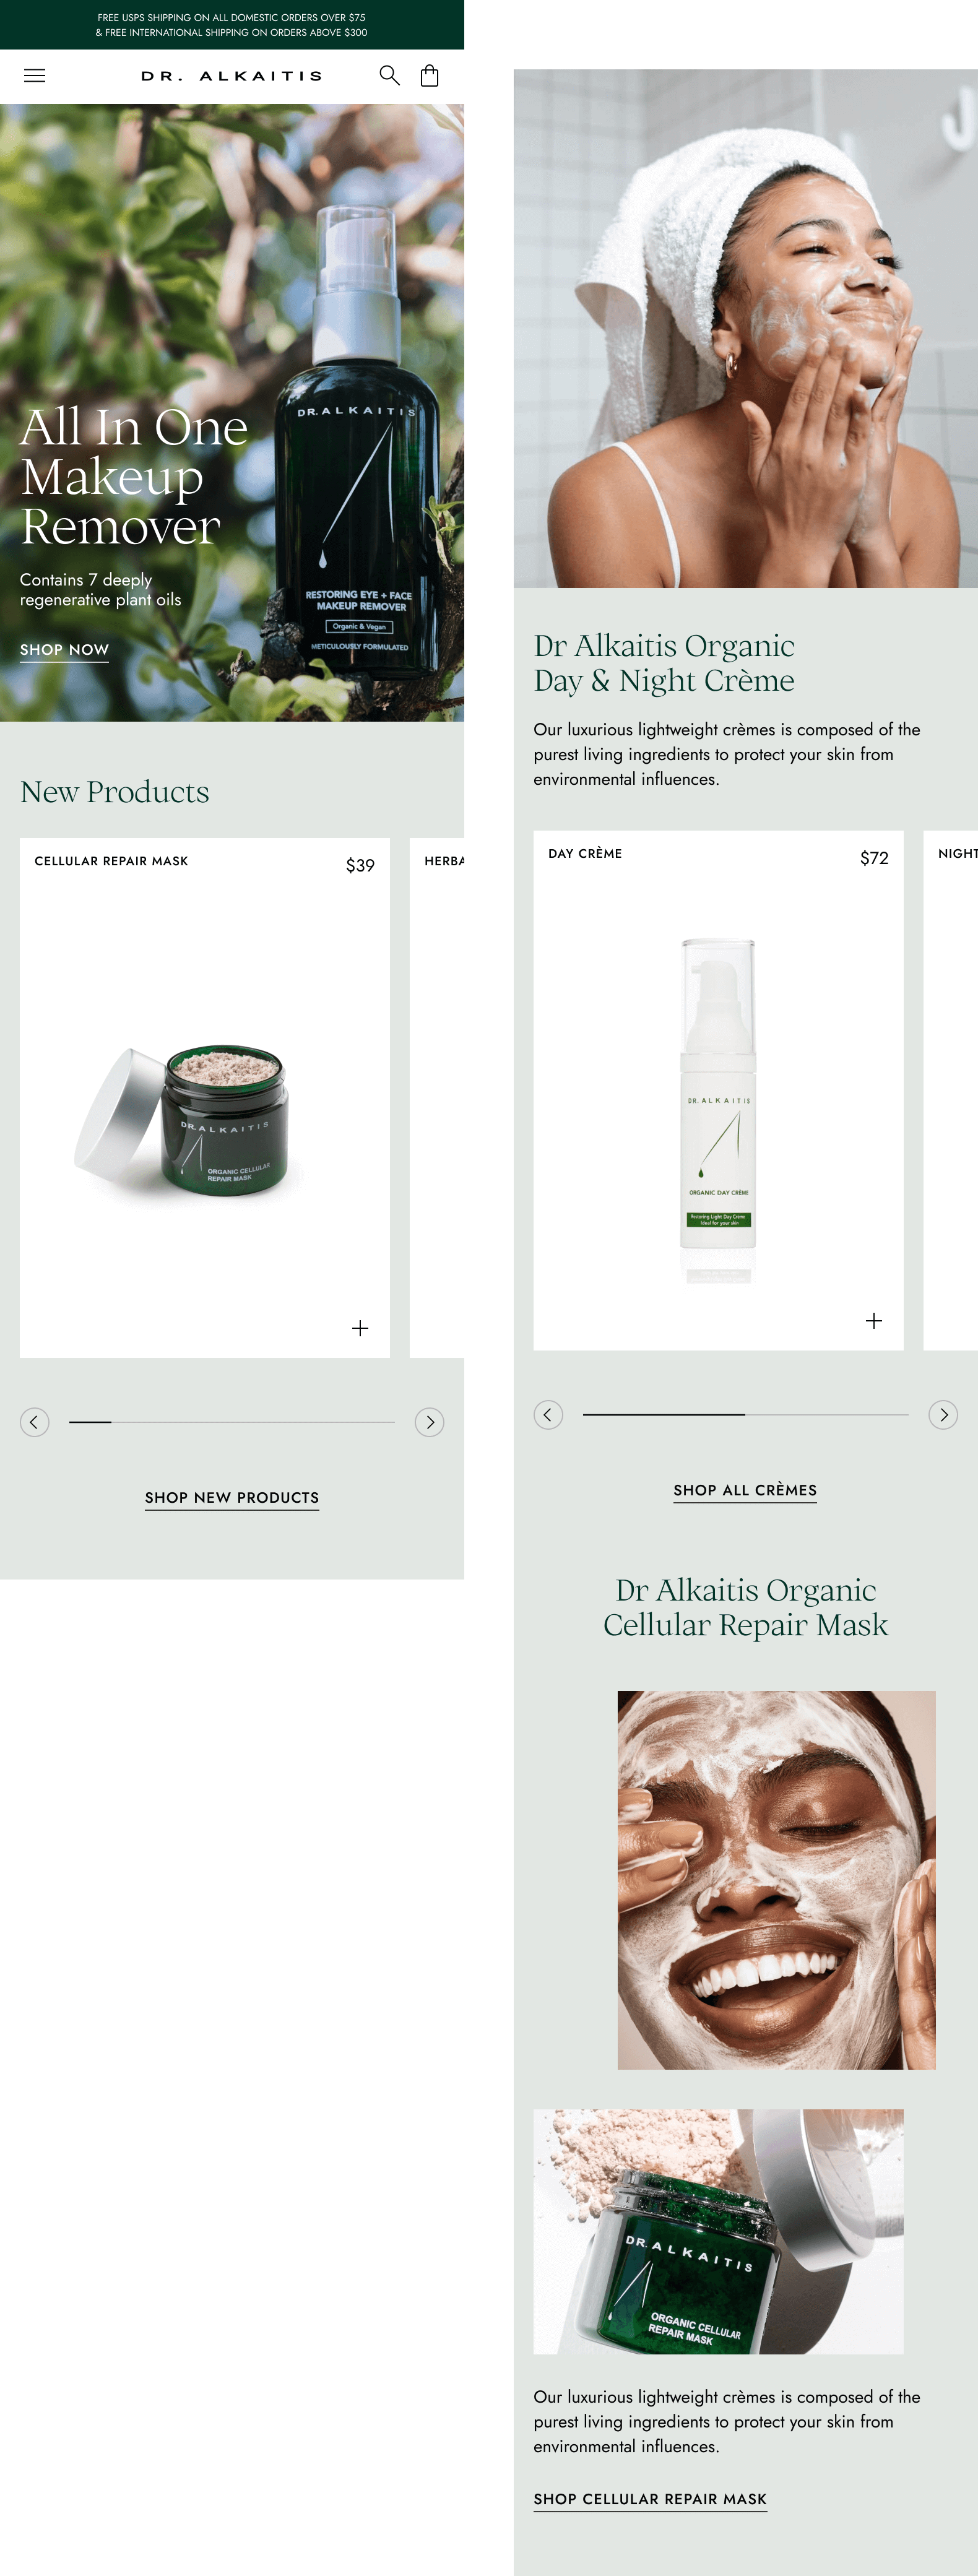 Mobile version of layouts: featured products, featured collection.